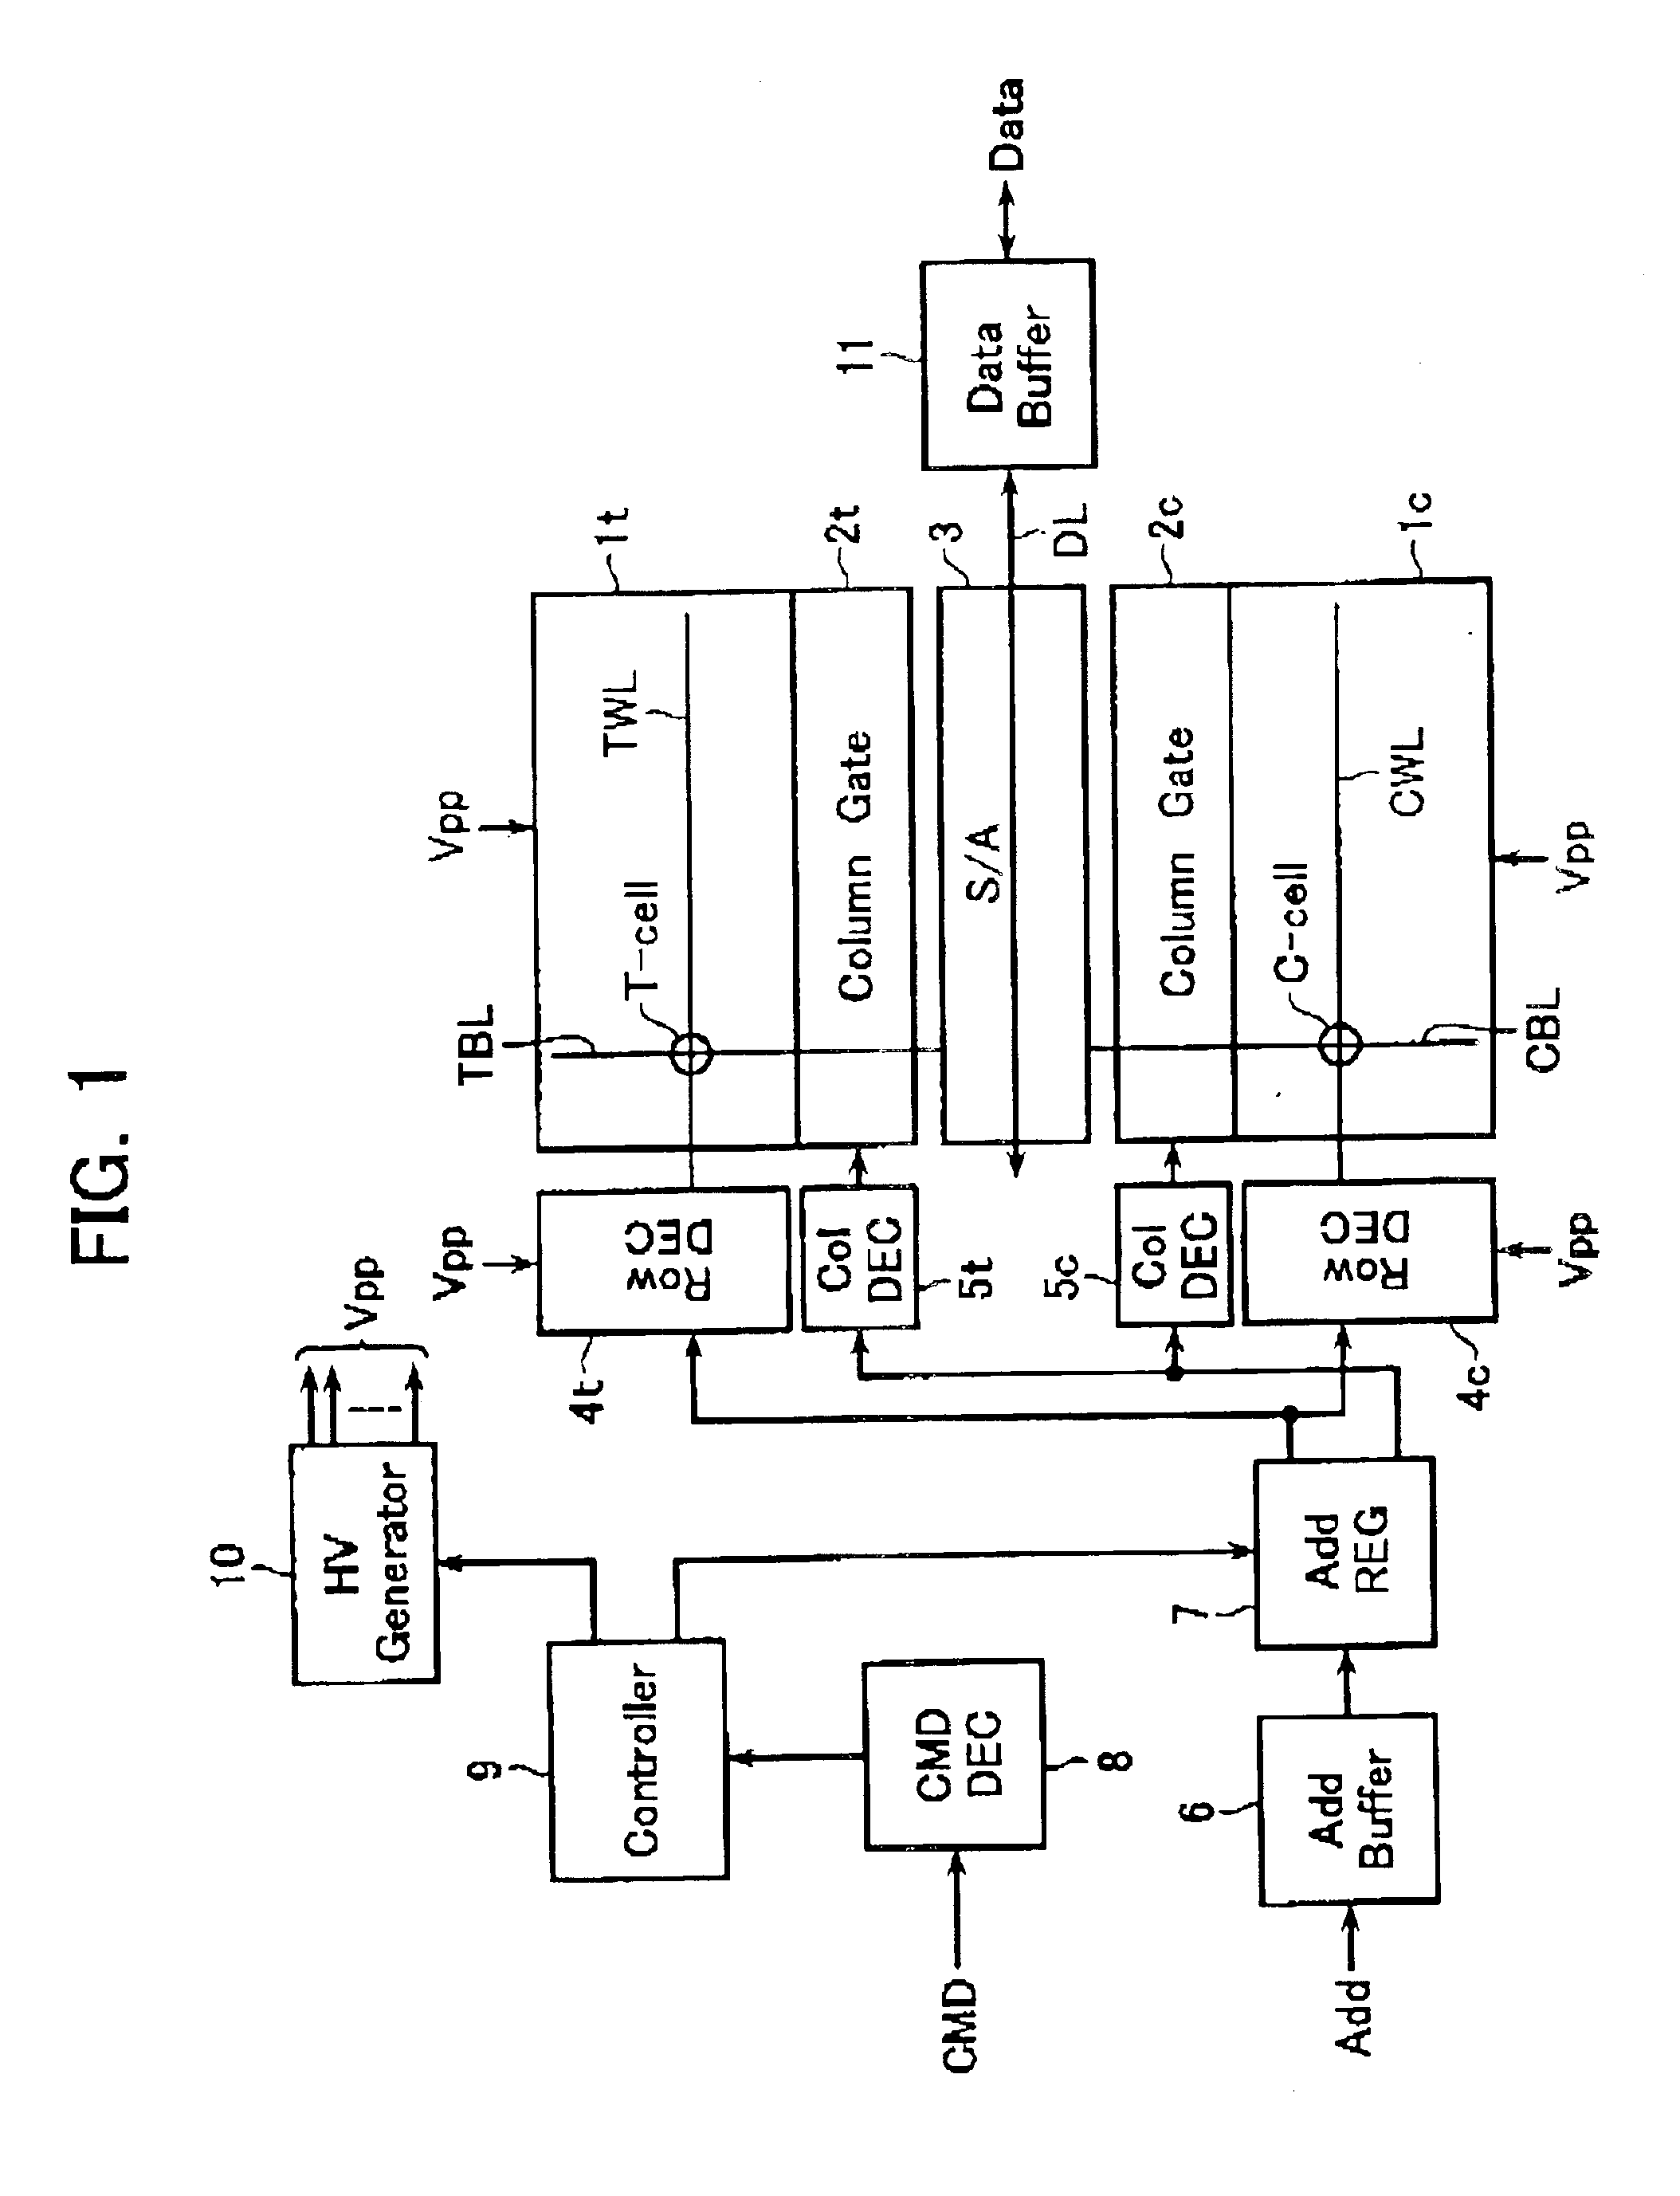 Non-volatile semiconductor memory device reading and writing multi-value data from and into pair-cells